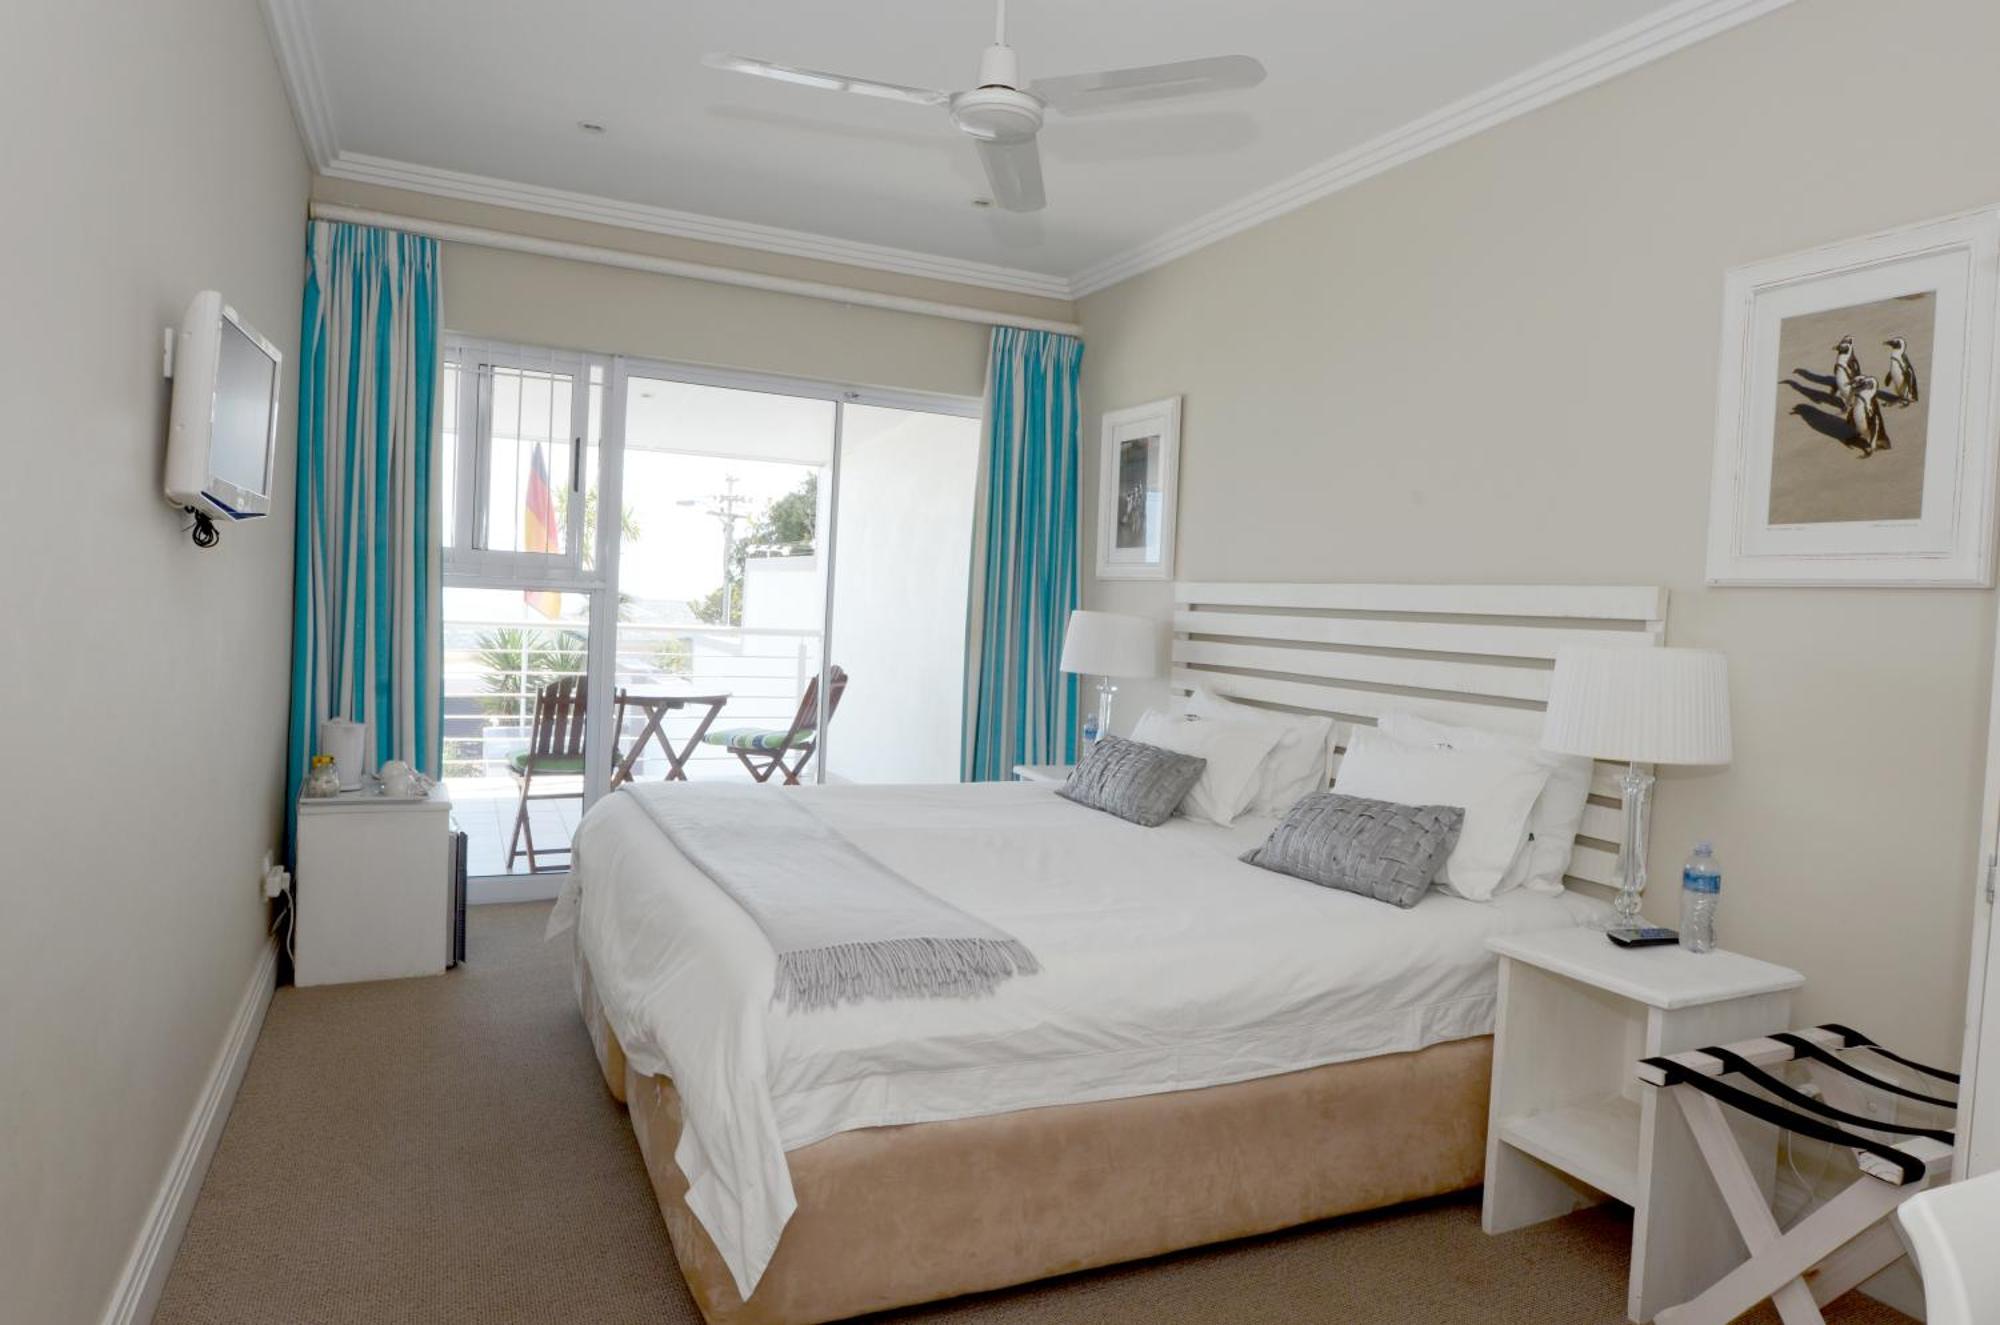 61 On Camps Bay Bed & Breakfast Cape Town Ruang foto